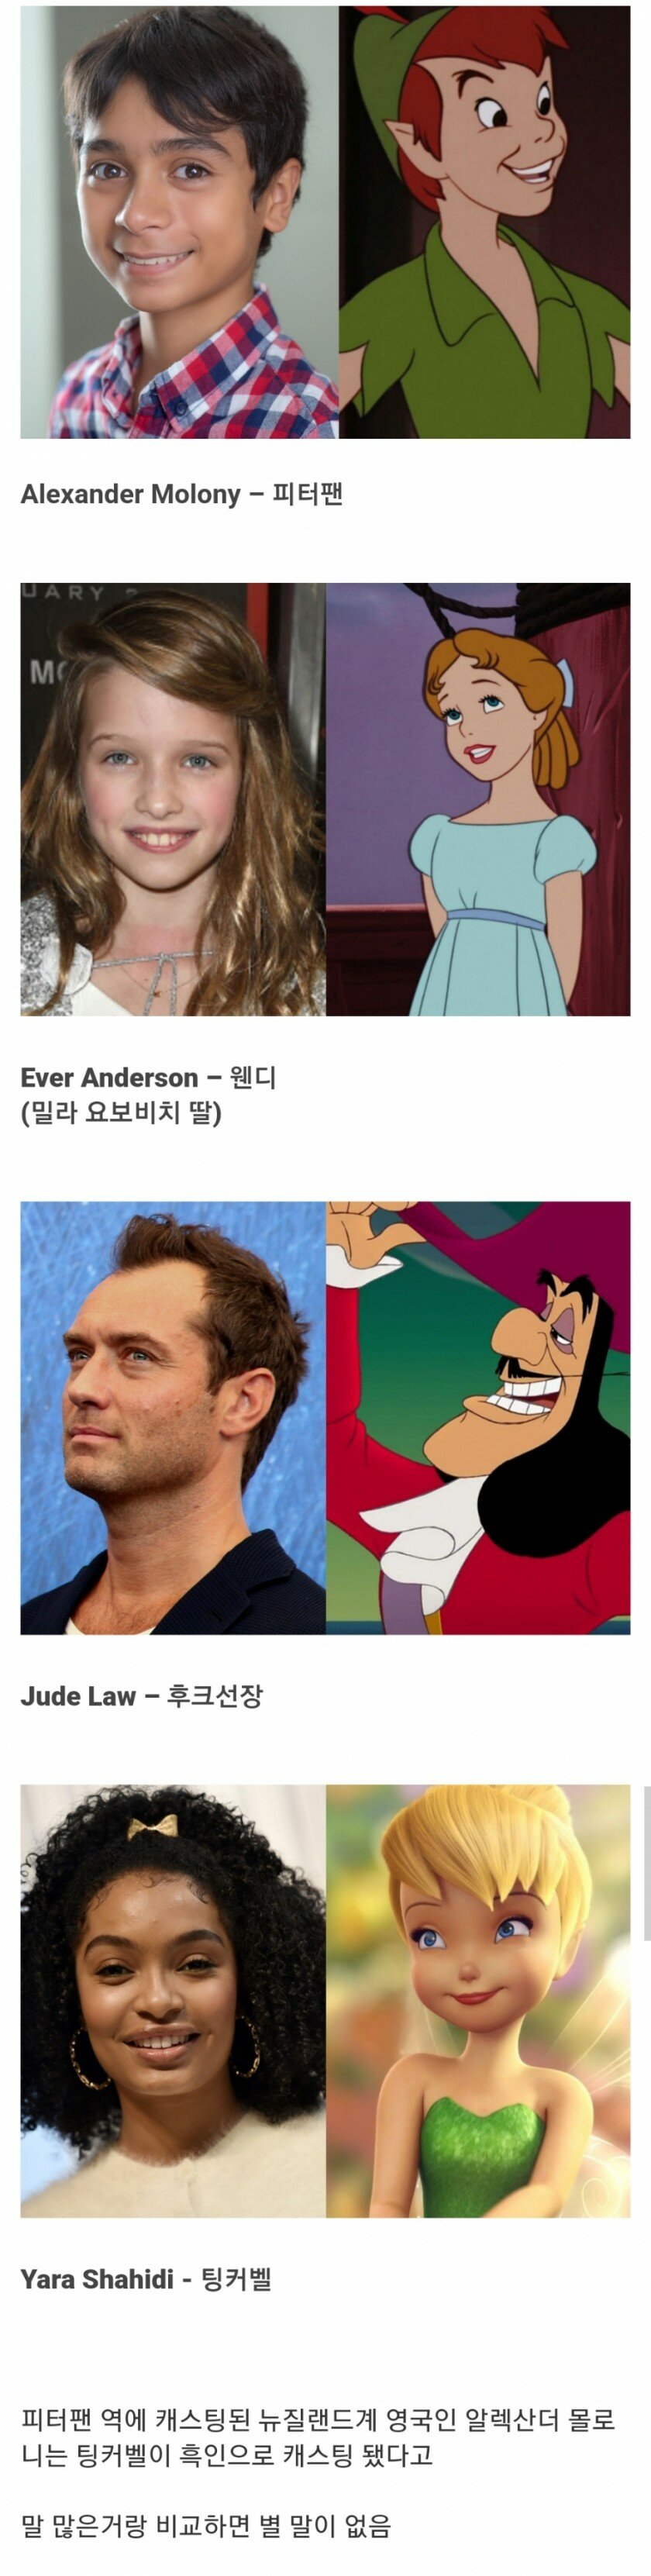 Peter Pan's live-action movie casting status.